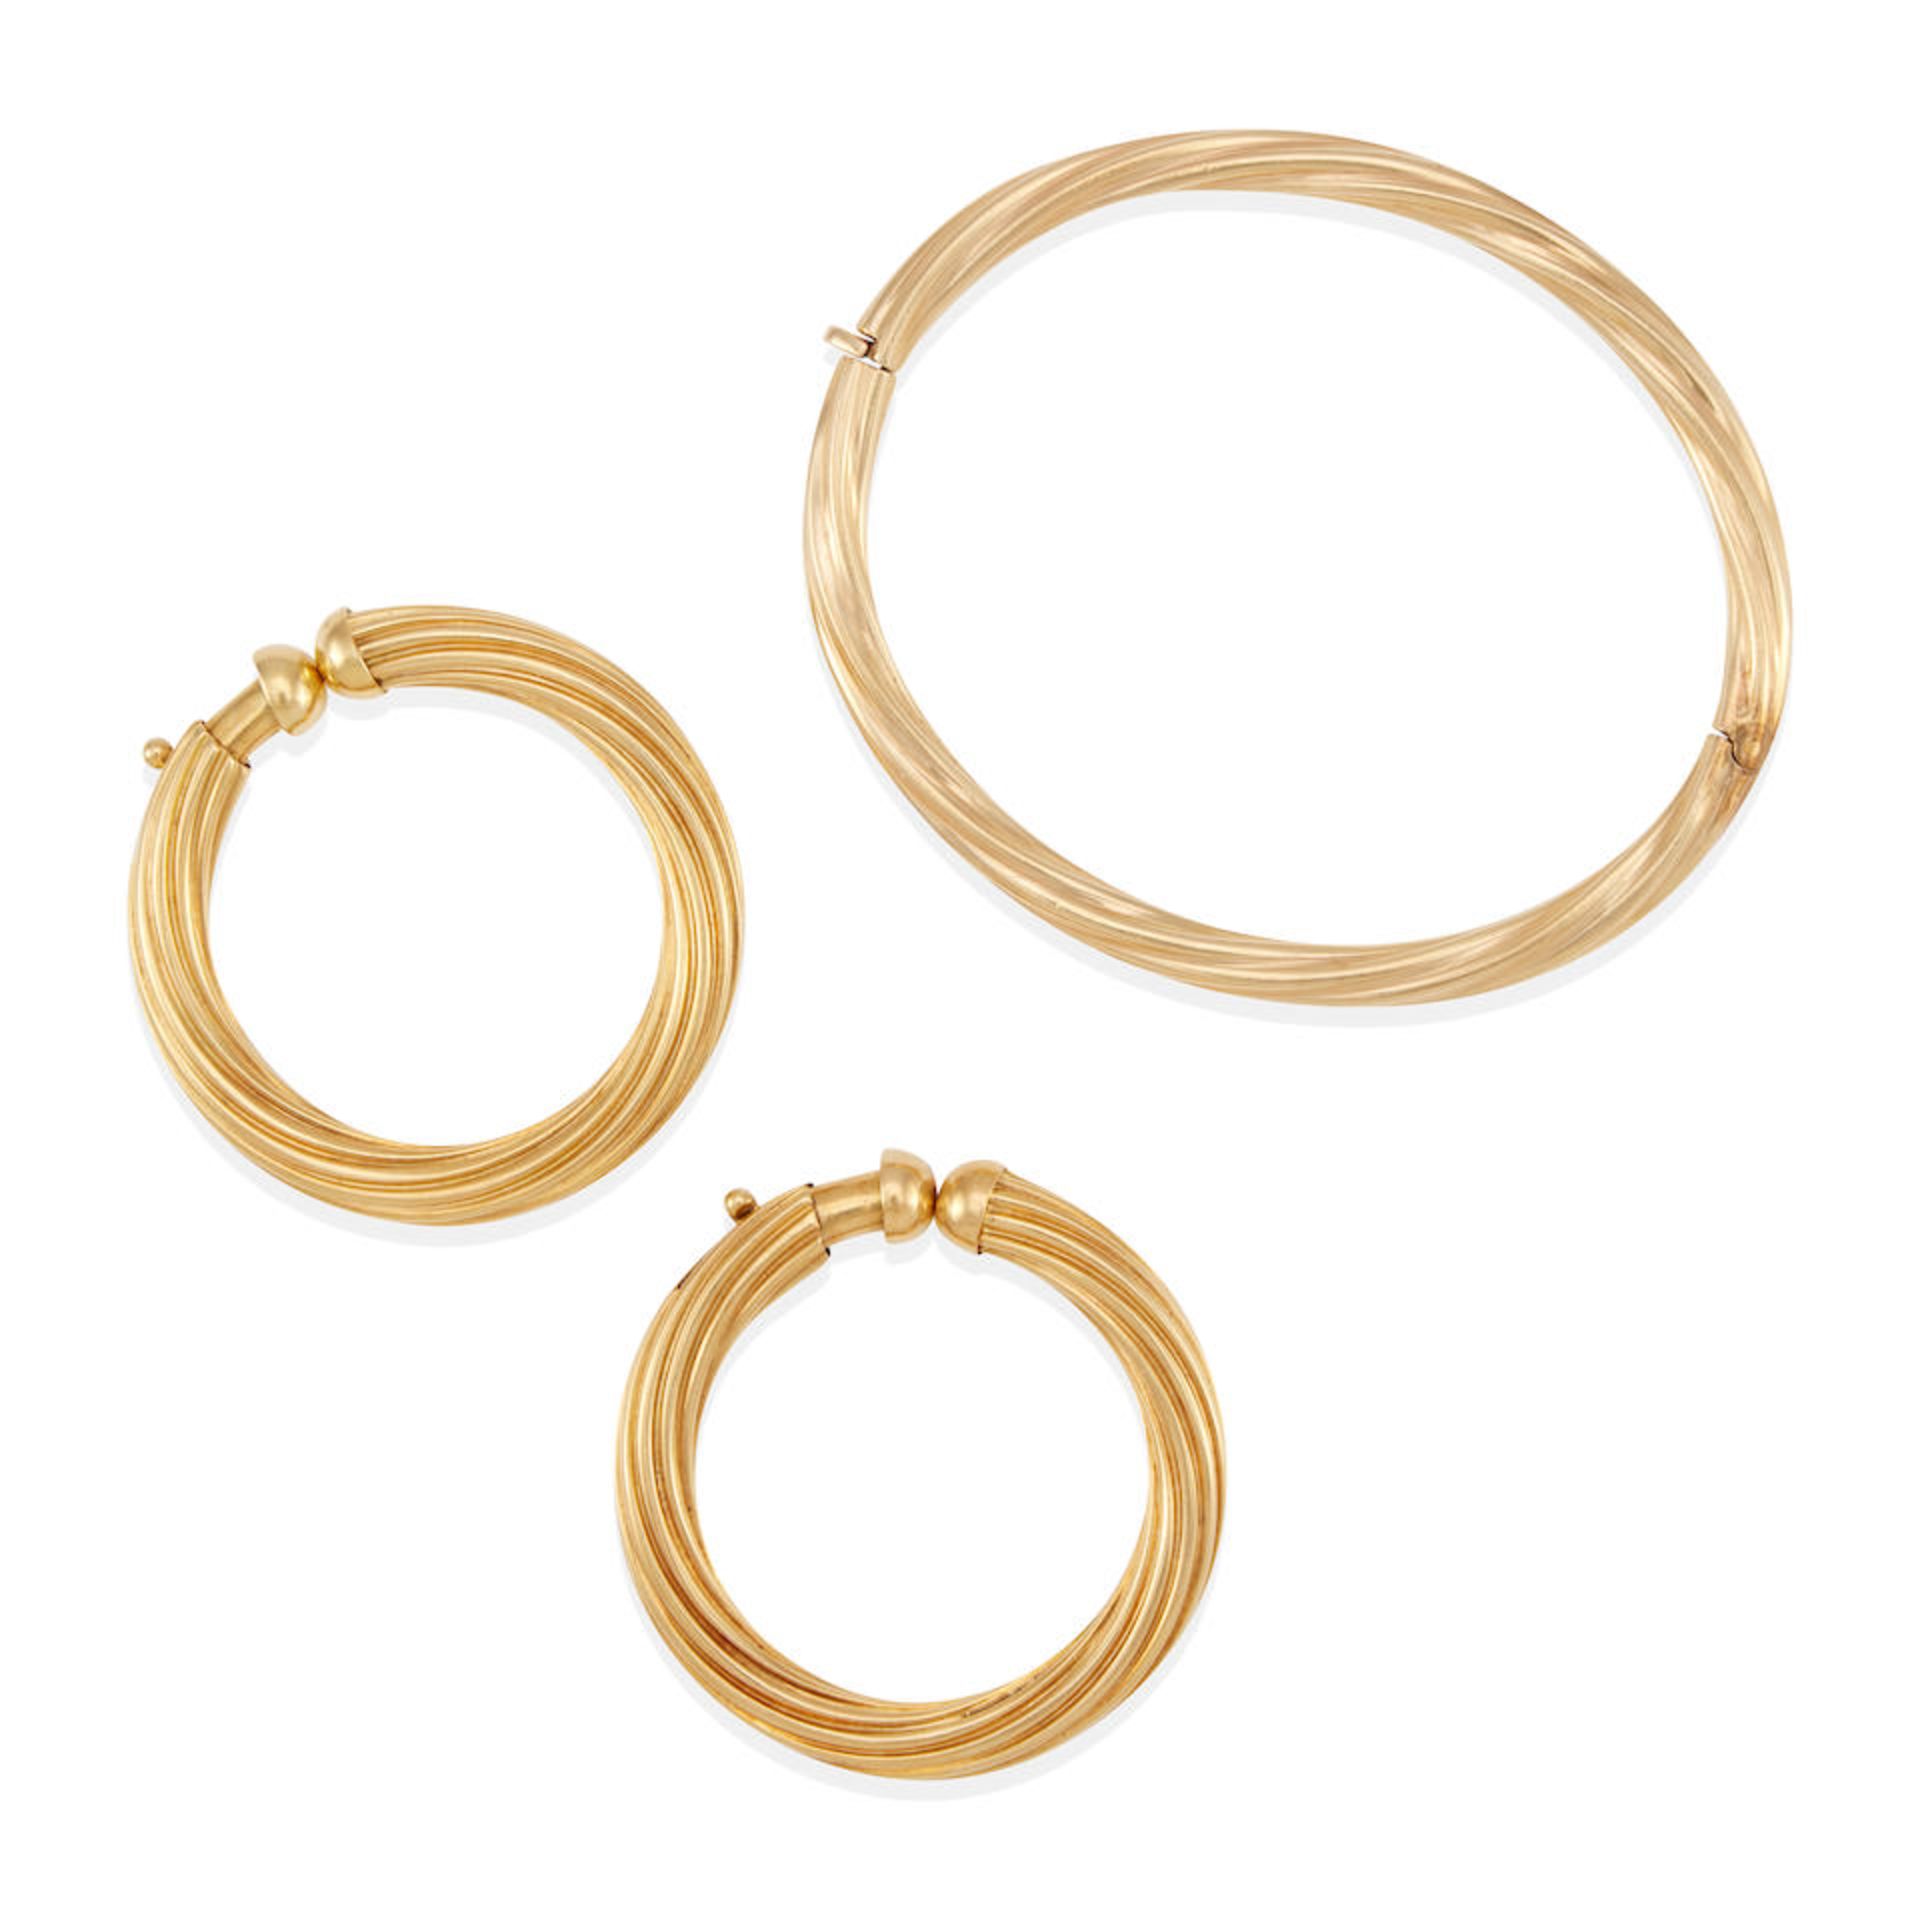 A 14K GOLD BANGLE BRACELET AND A PAIR OF 18K GOLD HOOP EARCLIPS - Image 2 of 2